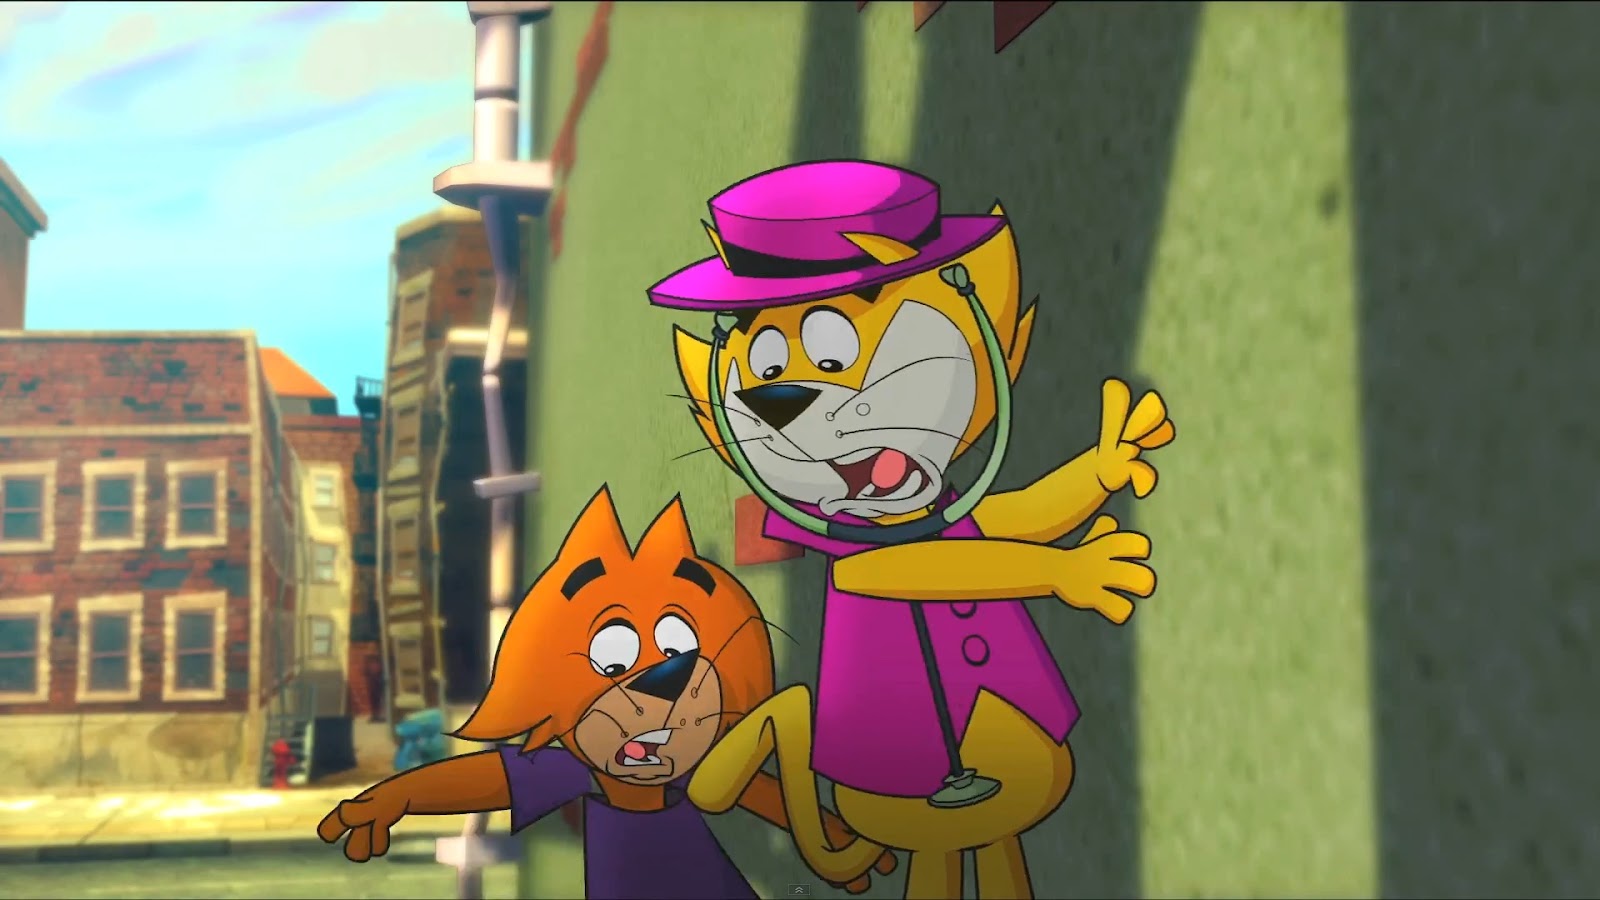 Like the movie? Buy the book.: Top Cat: Trailer for the movie